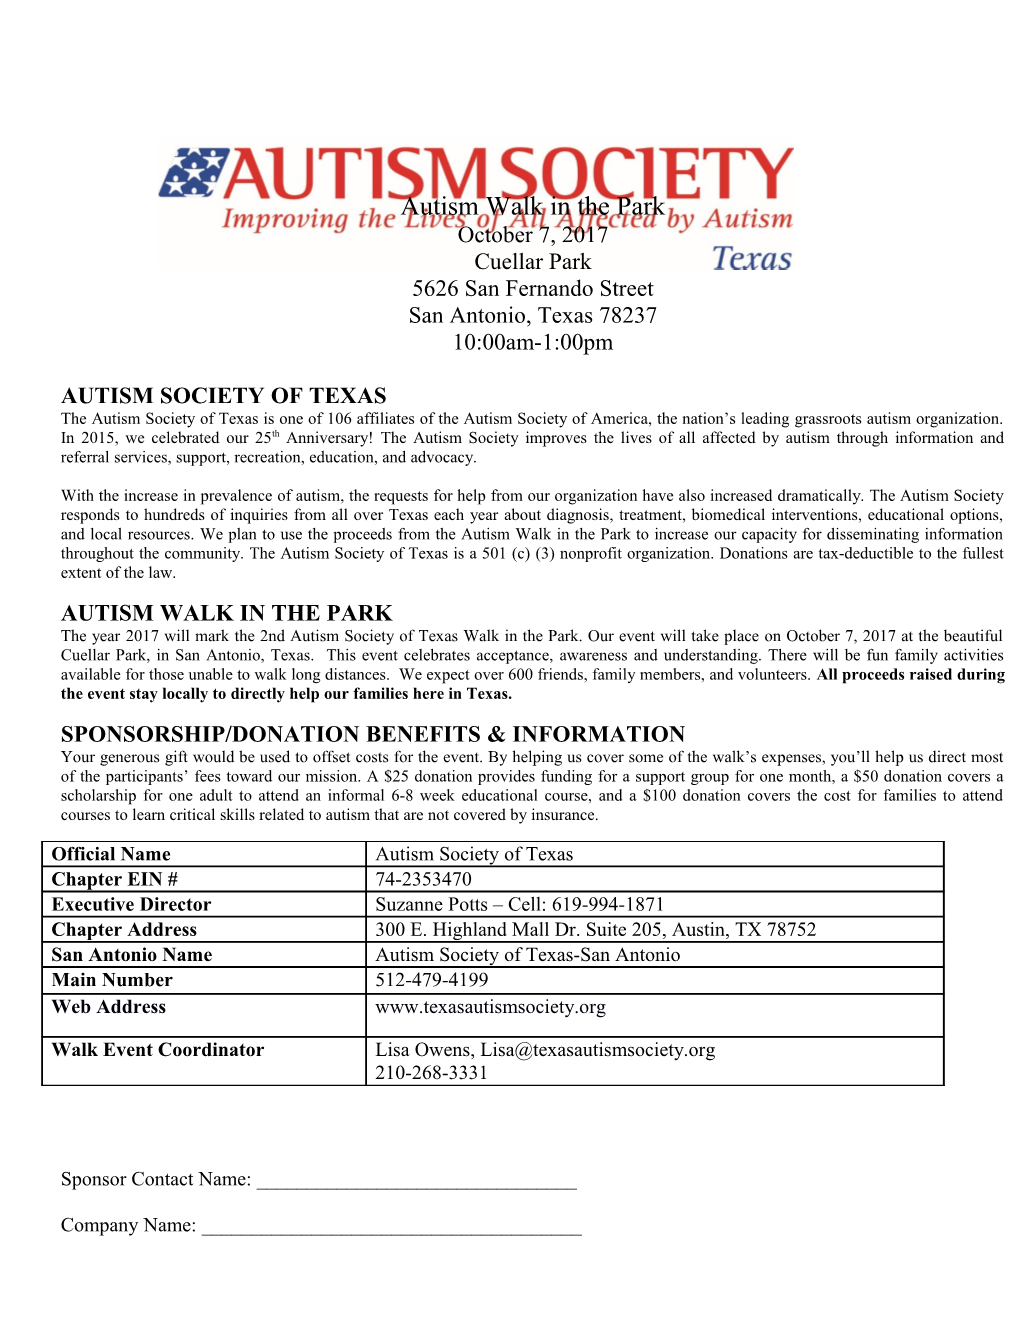 Autism Walk in the Park